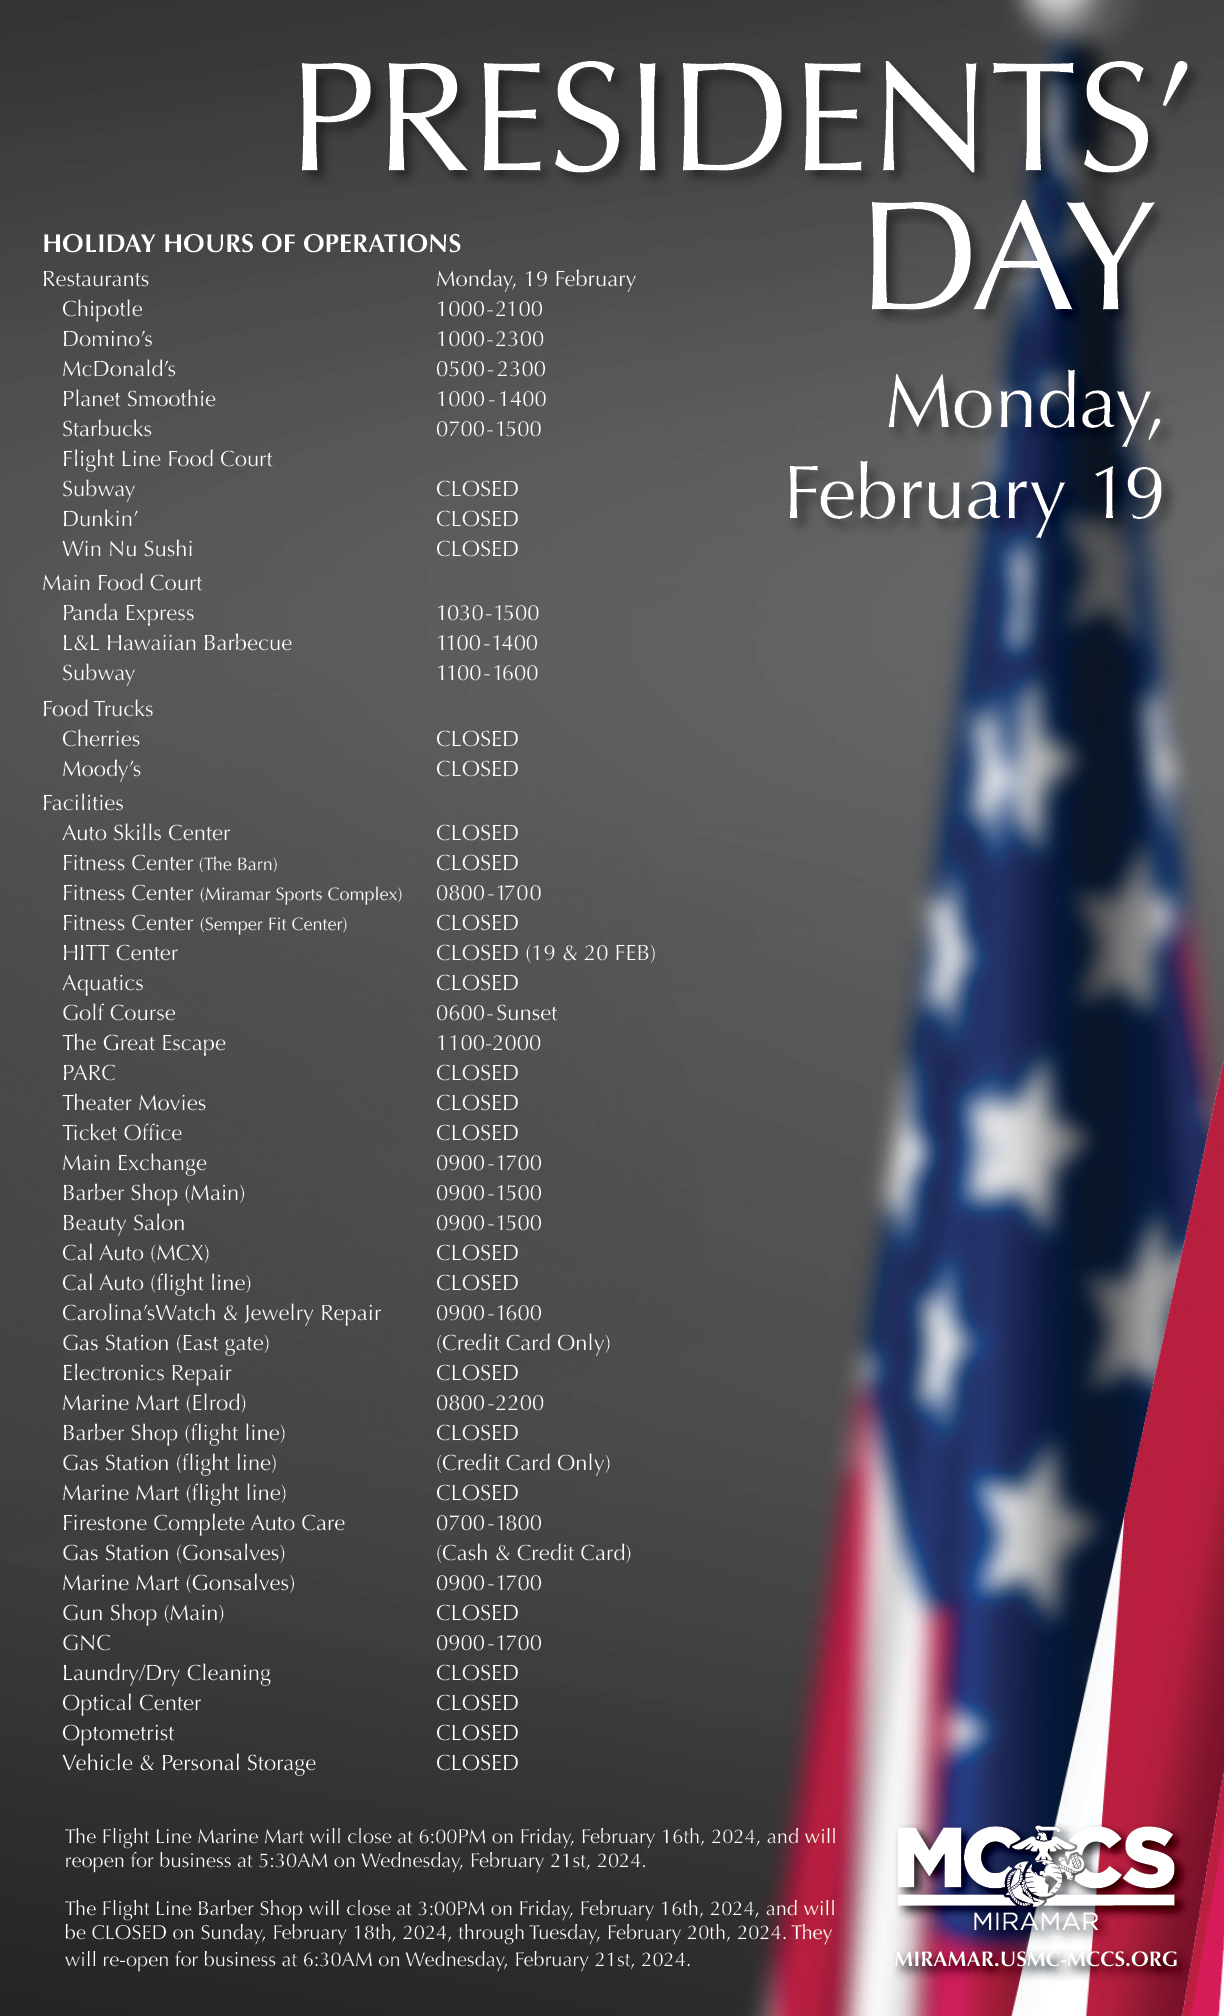 MCCS Miramar Holiday Hours of Operatoin for Presidents' Day, Monday, February 19